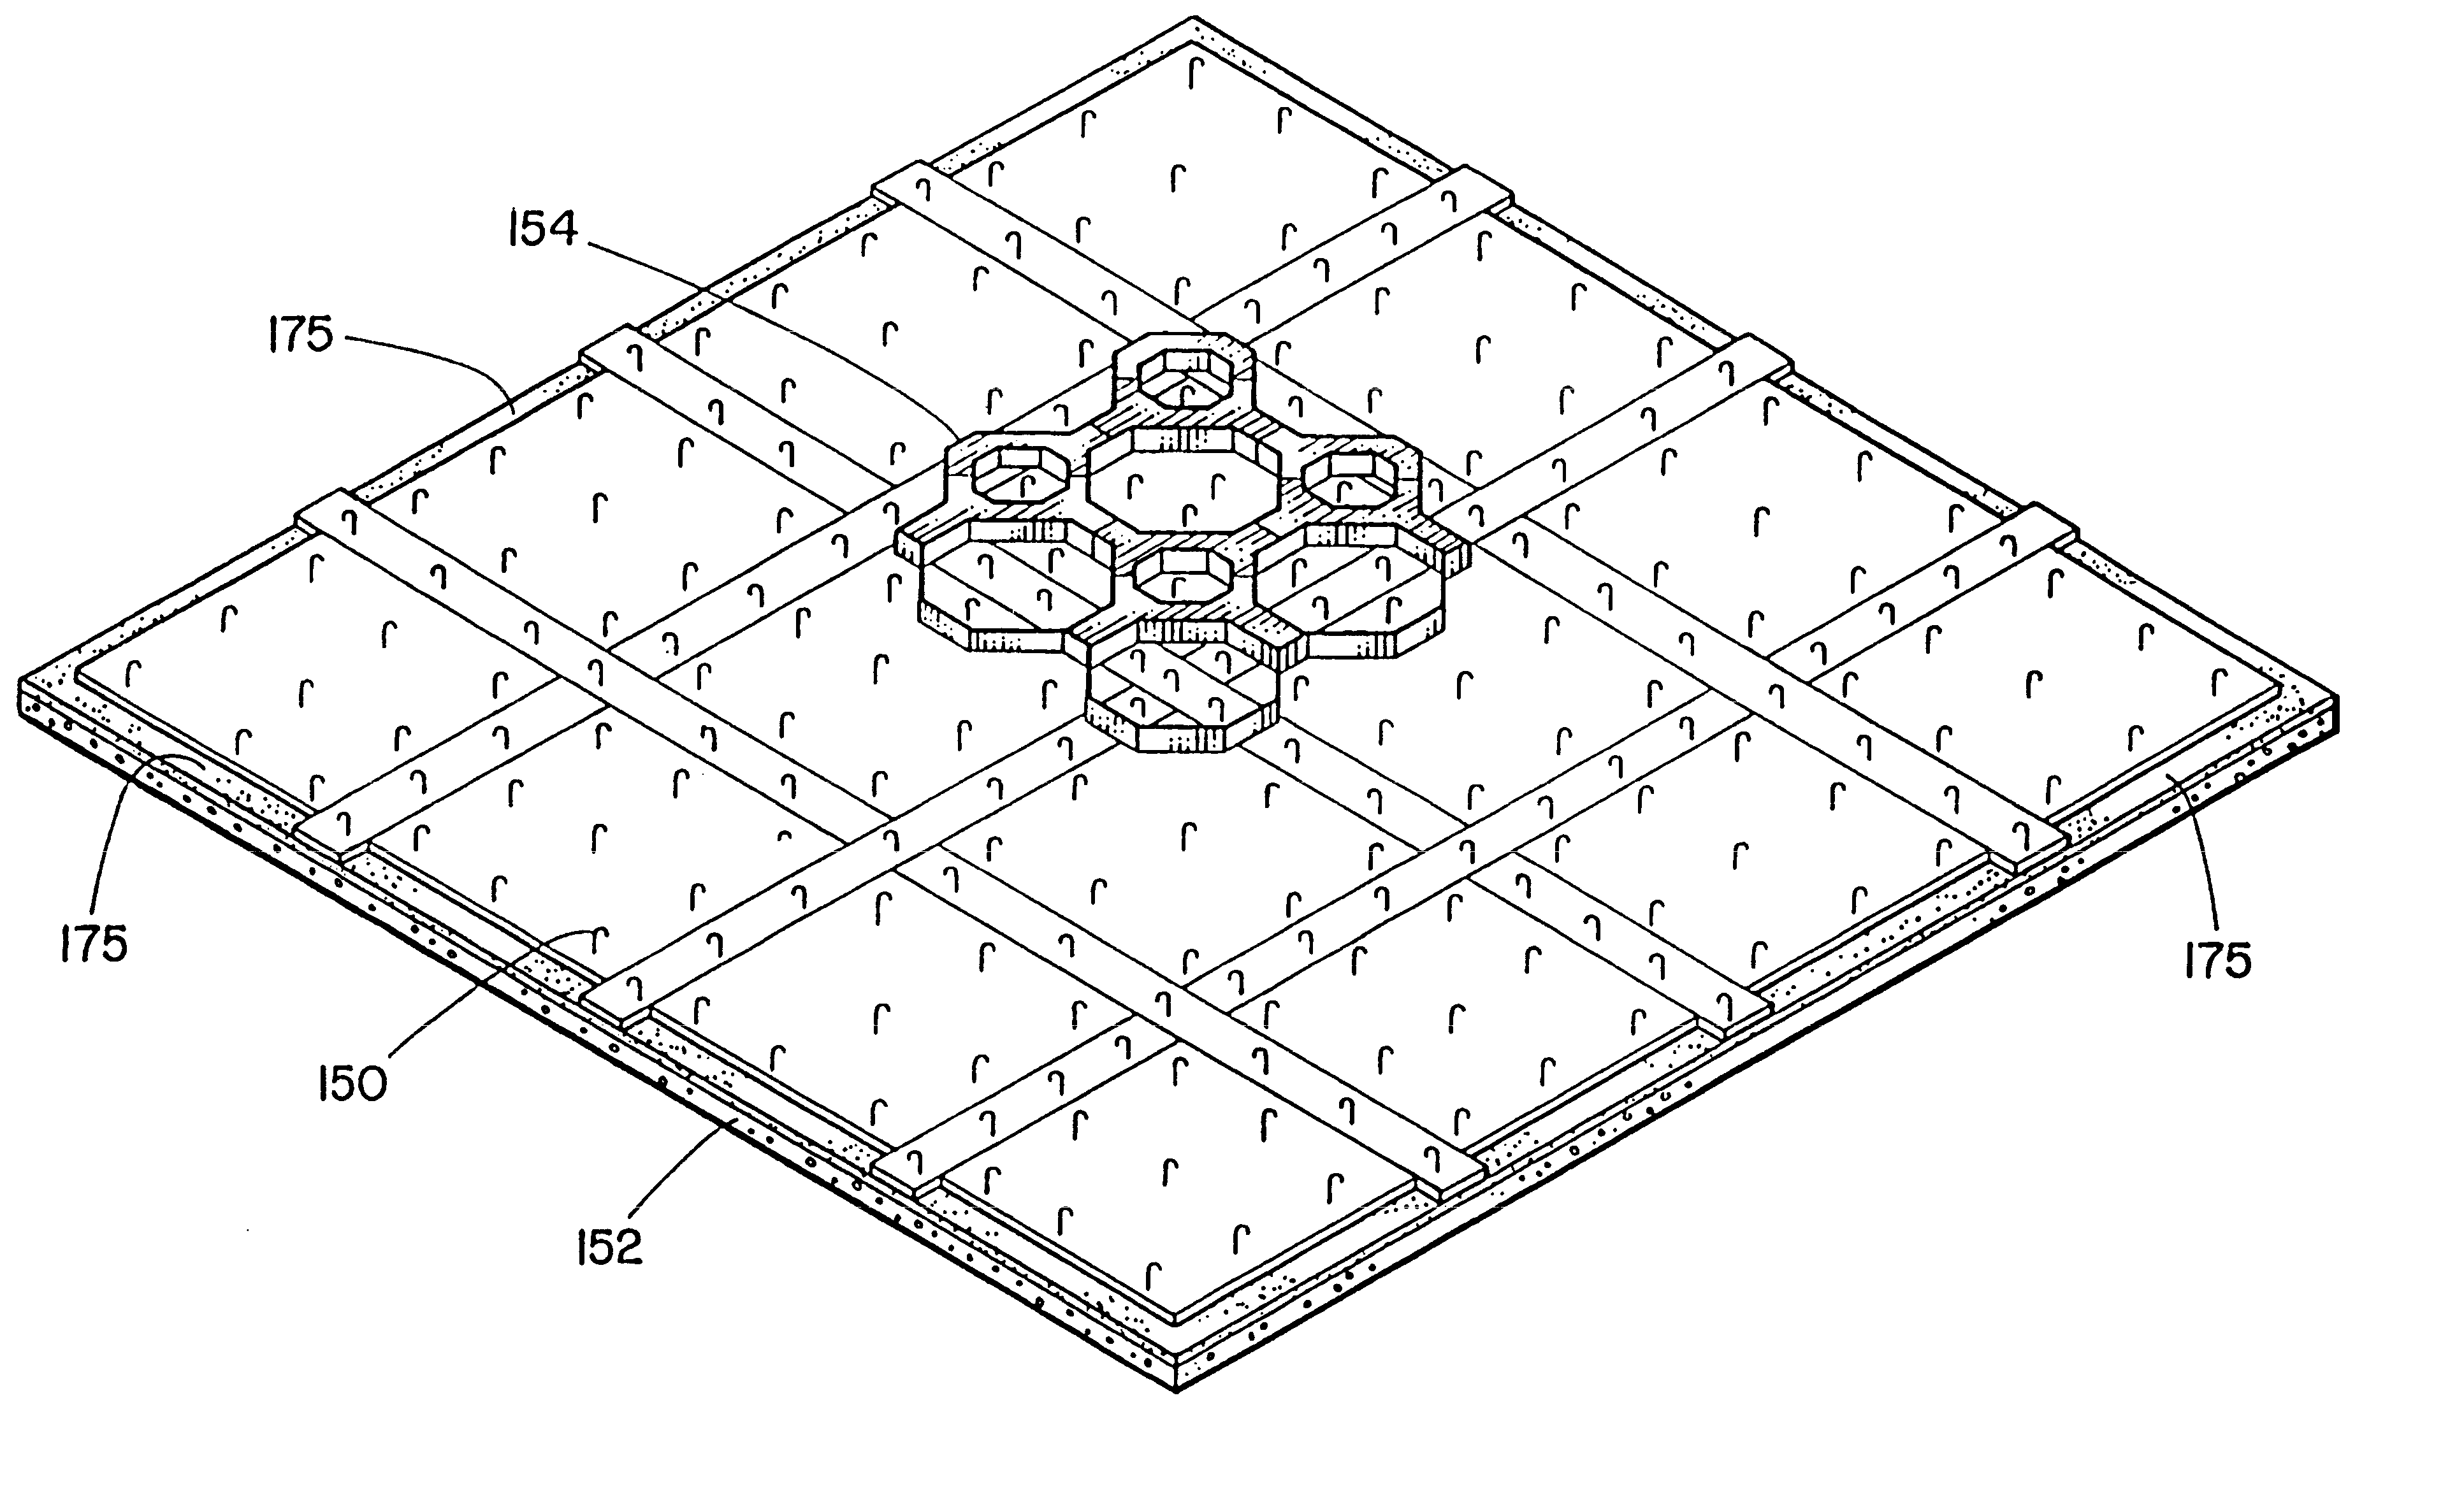 Hook and loop anchor sheet module with overlapped edges and sufficient mass to resist buckling